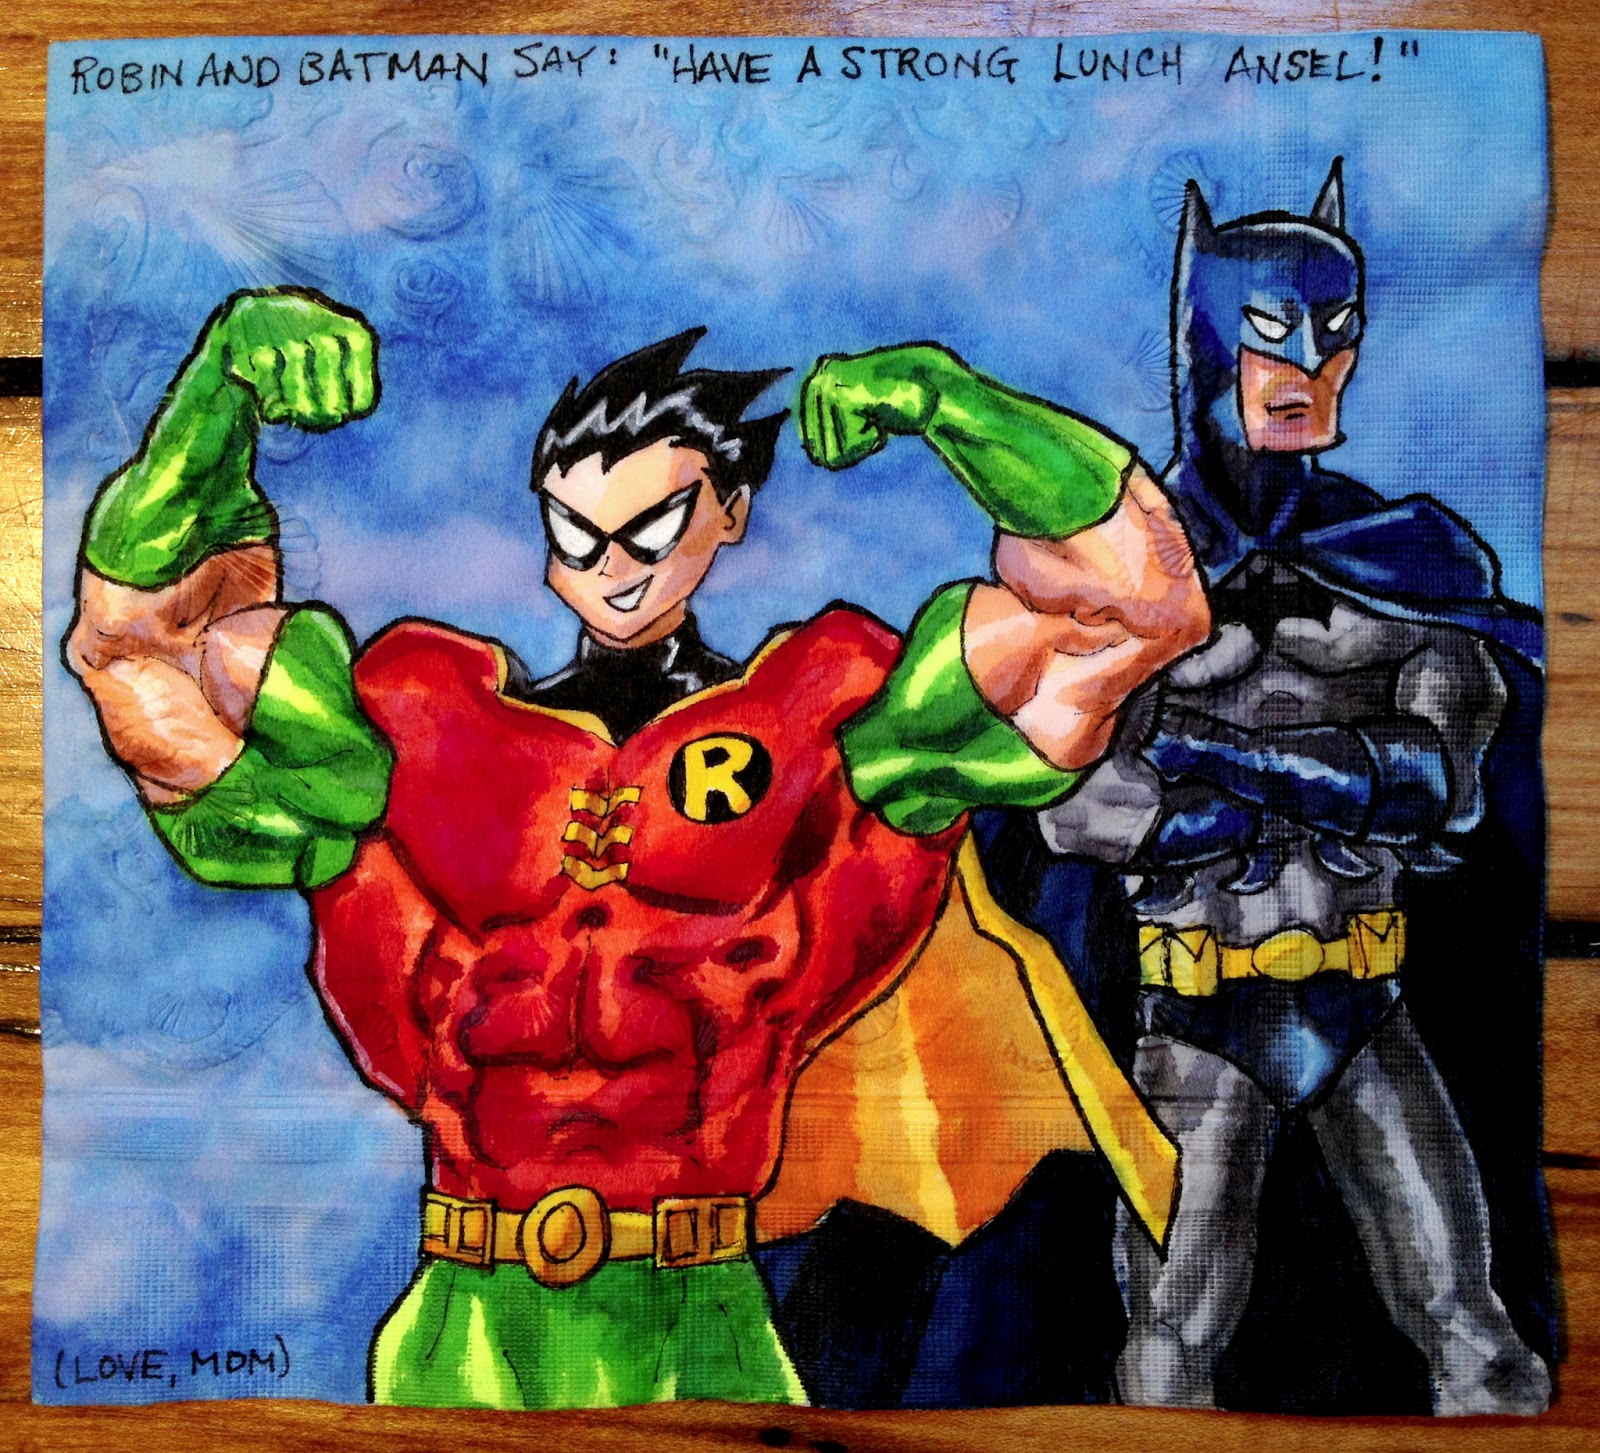 teen titans robin muscles - Robin And Batman Say! "Have A Strong Lunch Ansel!" Alious Love, Mom